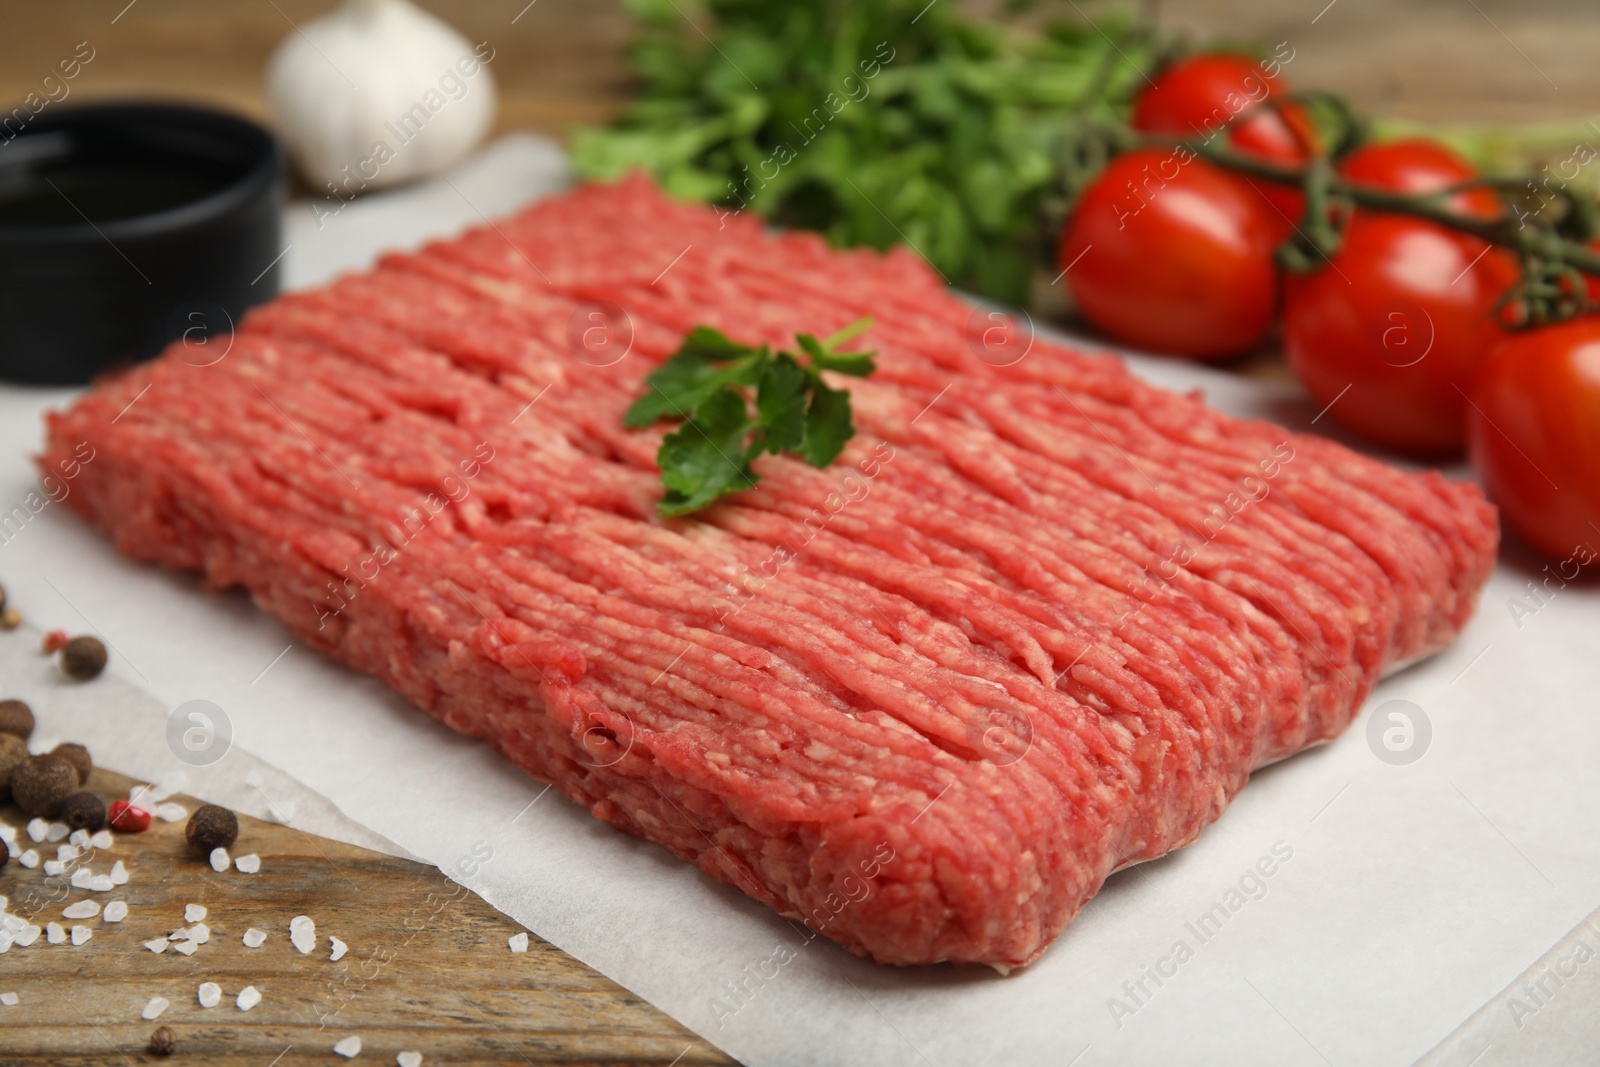 Photo of Raw fresh minced meat, tomatoes and other ingredients on wooden table. Space for text